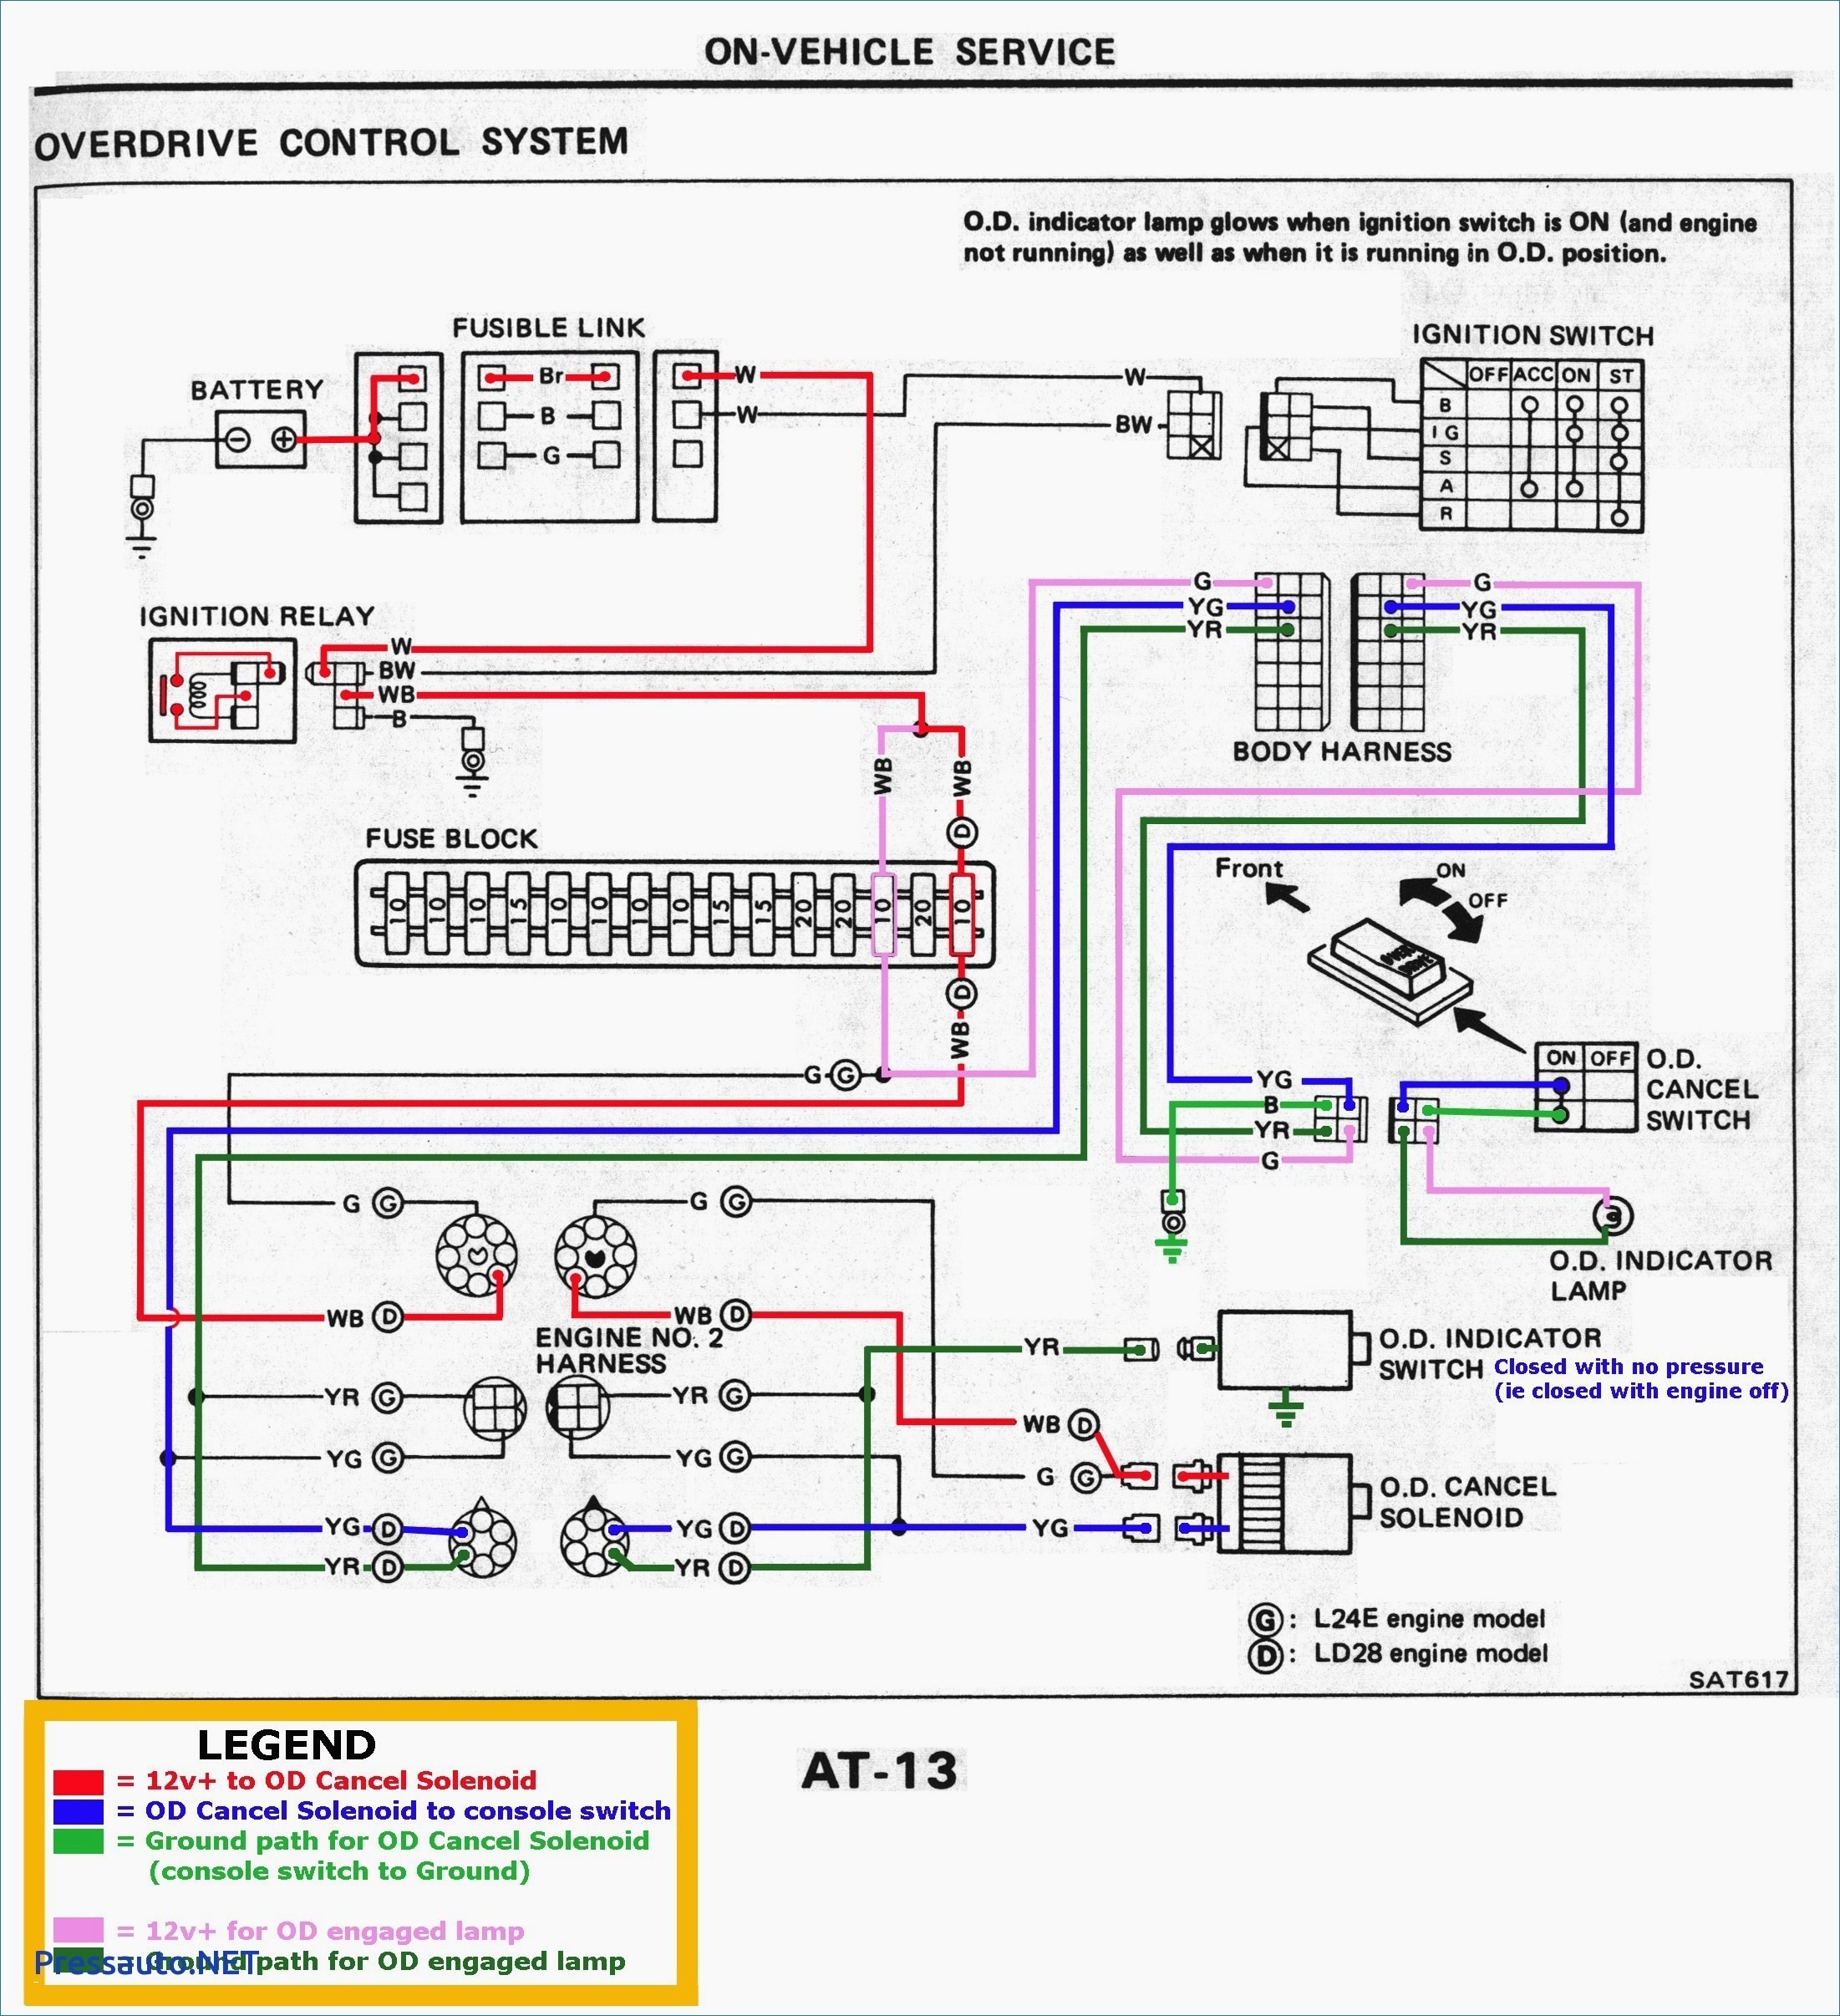 Wiring Diagram Light Relay Inspirationa Lawn Mower Ignition Switch House Light Switch Wiring Diagram Australia